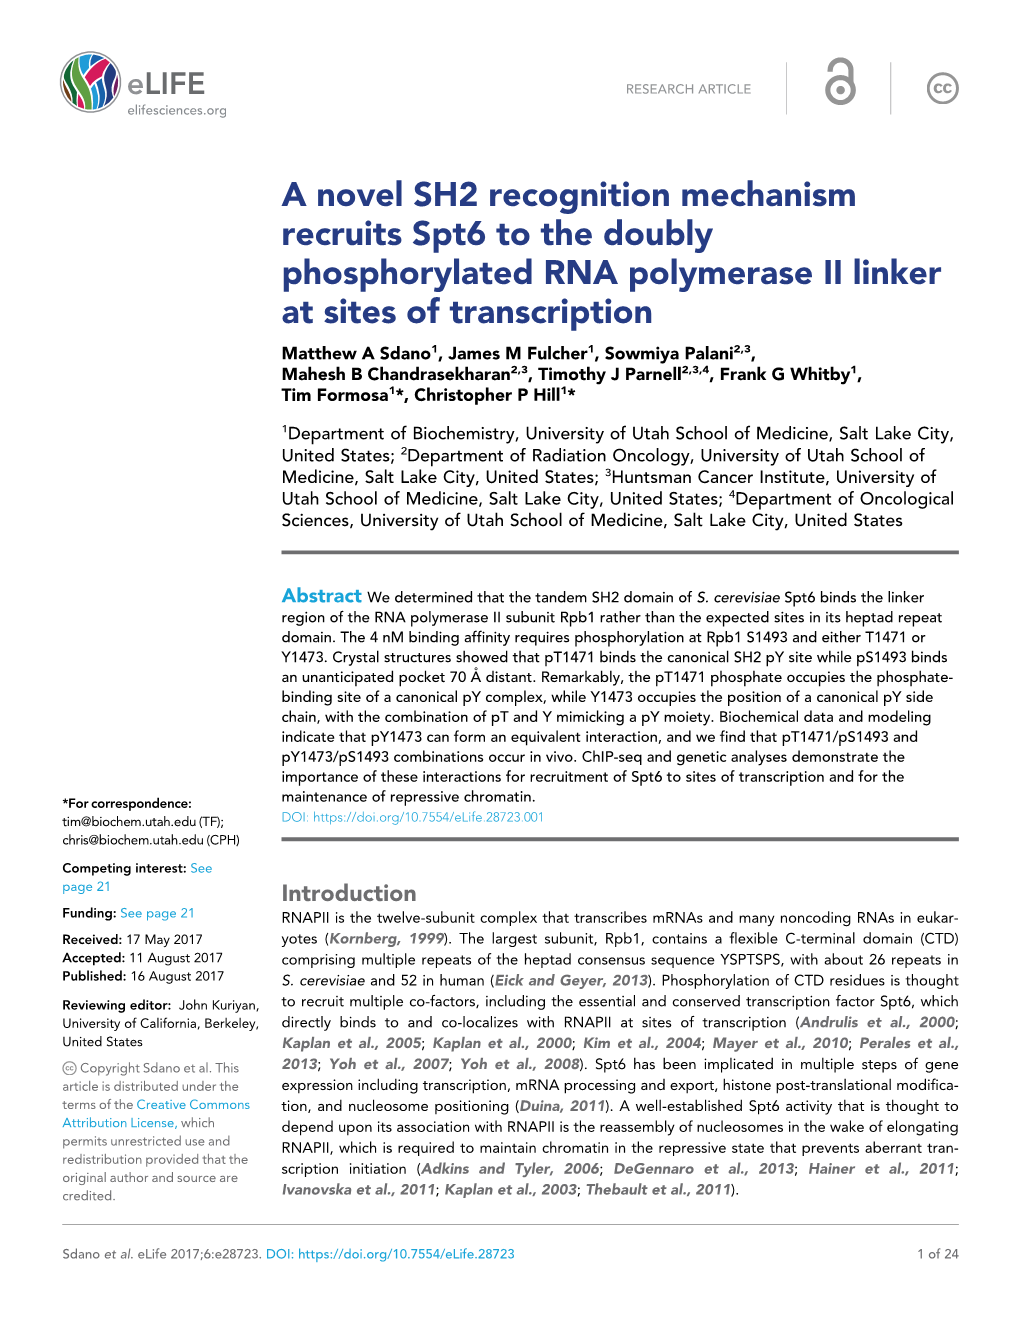 A Novel SH2 Recognition Mechanism Recruits Spt6 to the Doubly